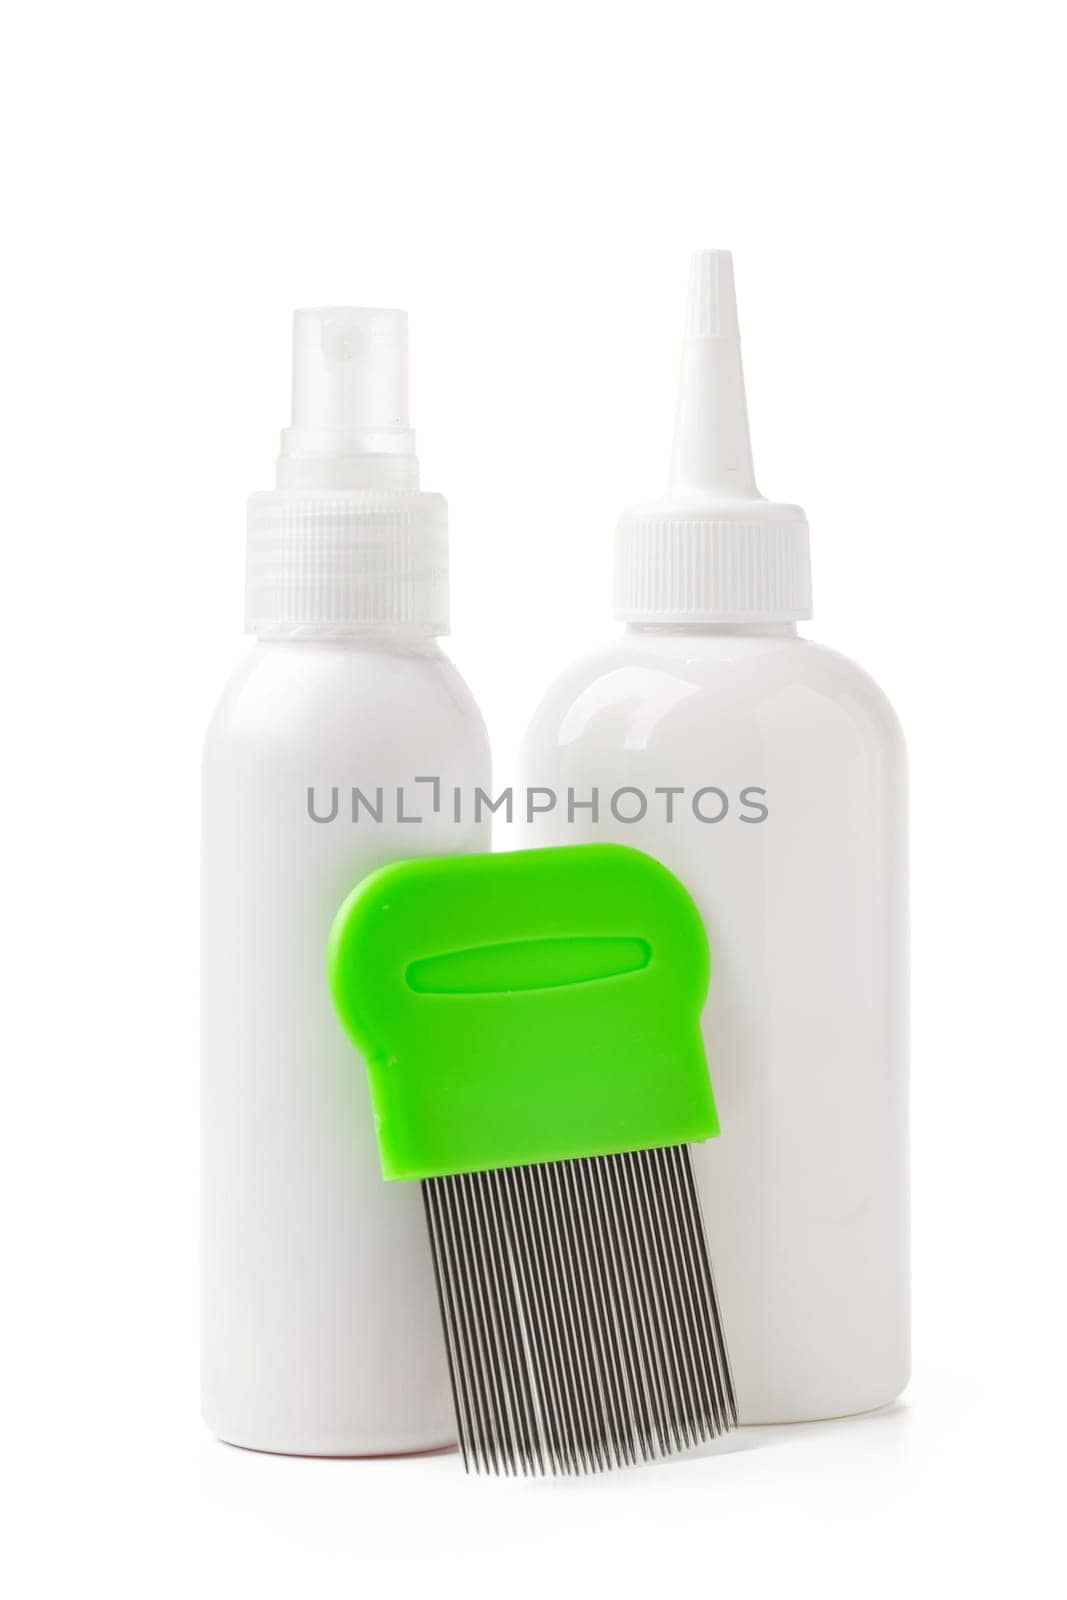 Cosmetic products and lice comb isolated on white background close up